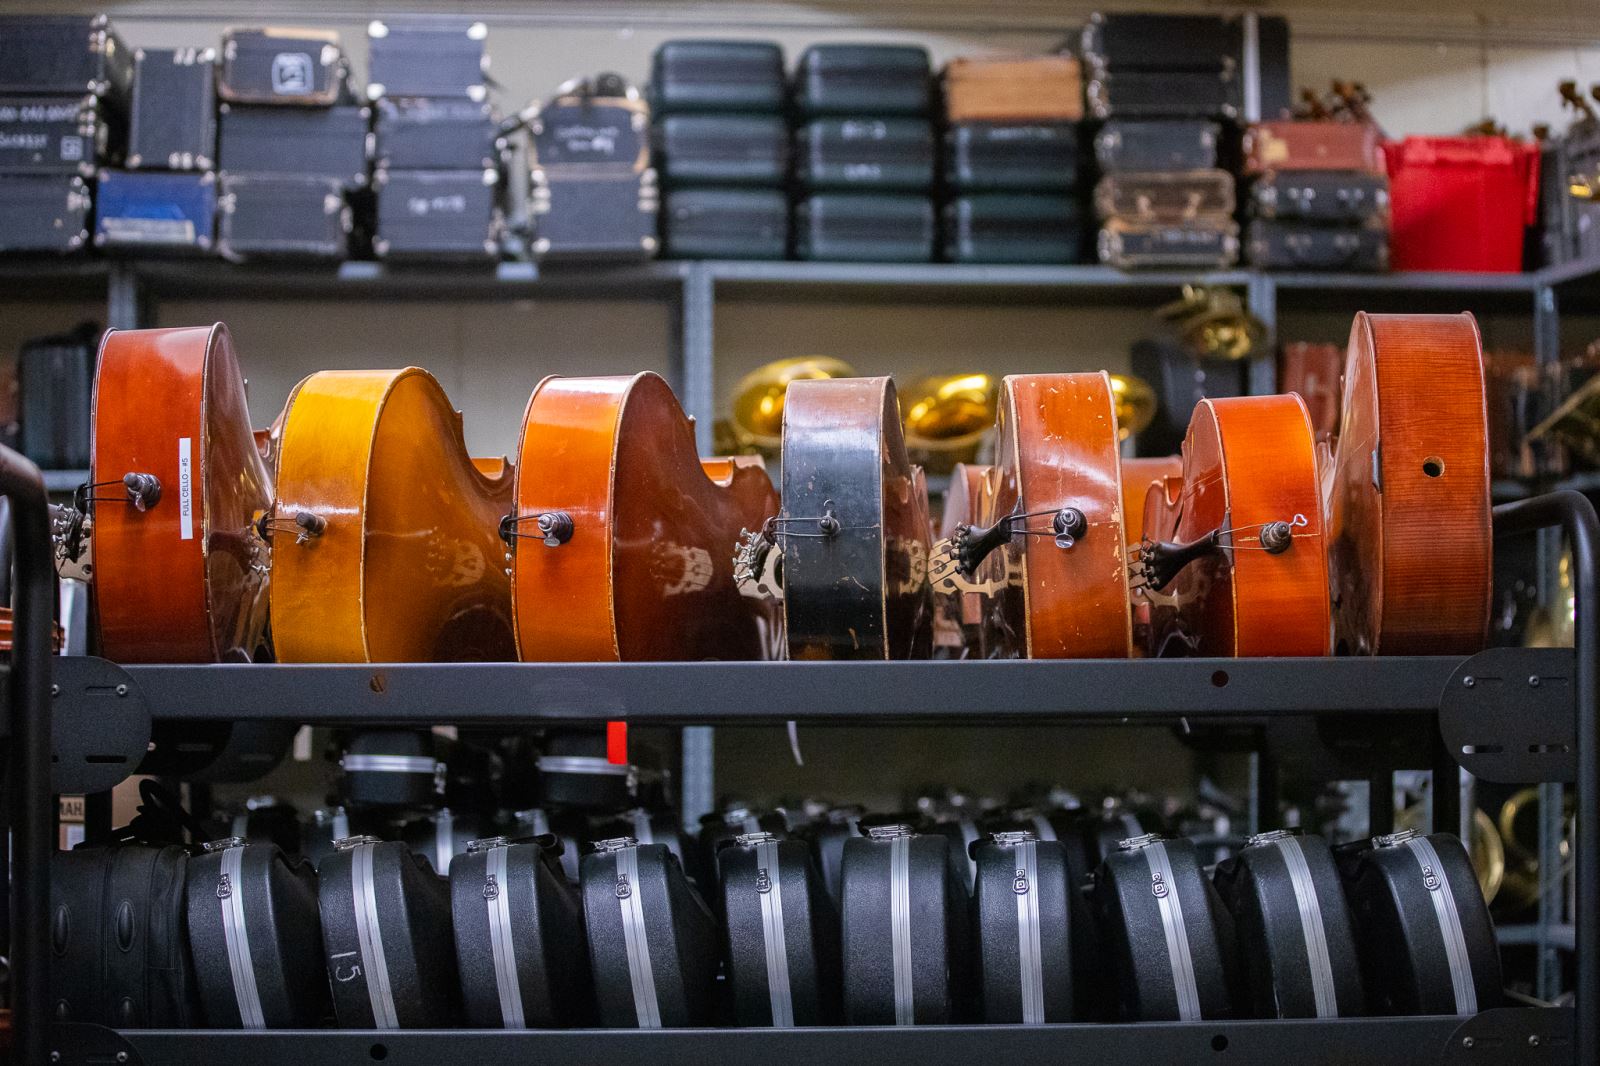 Many violins and cases in rows.